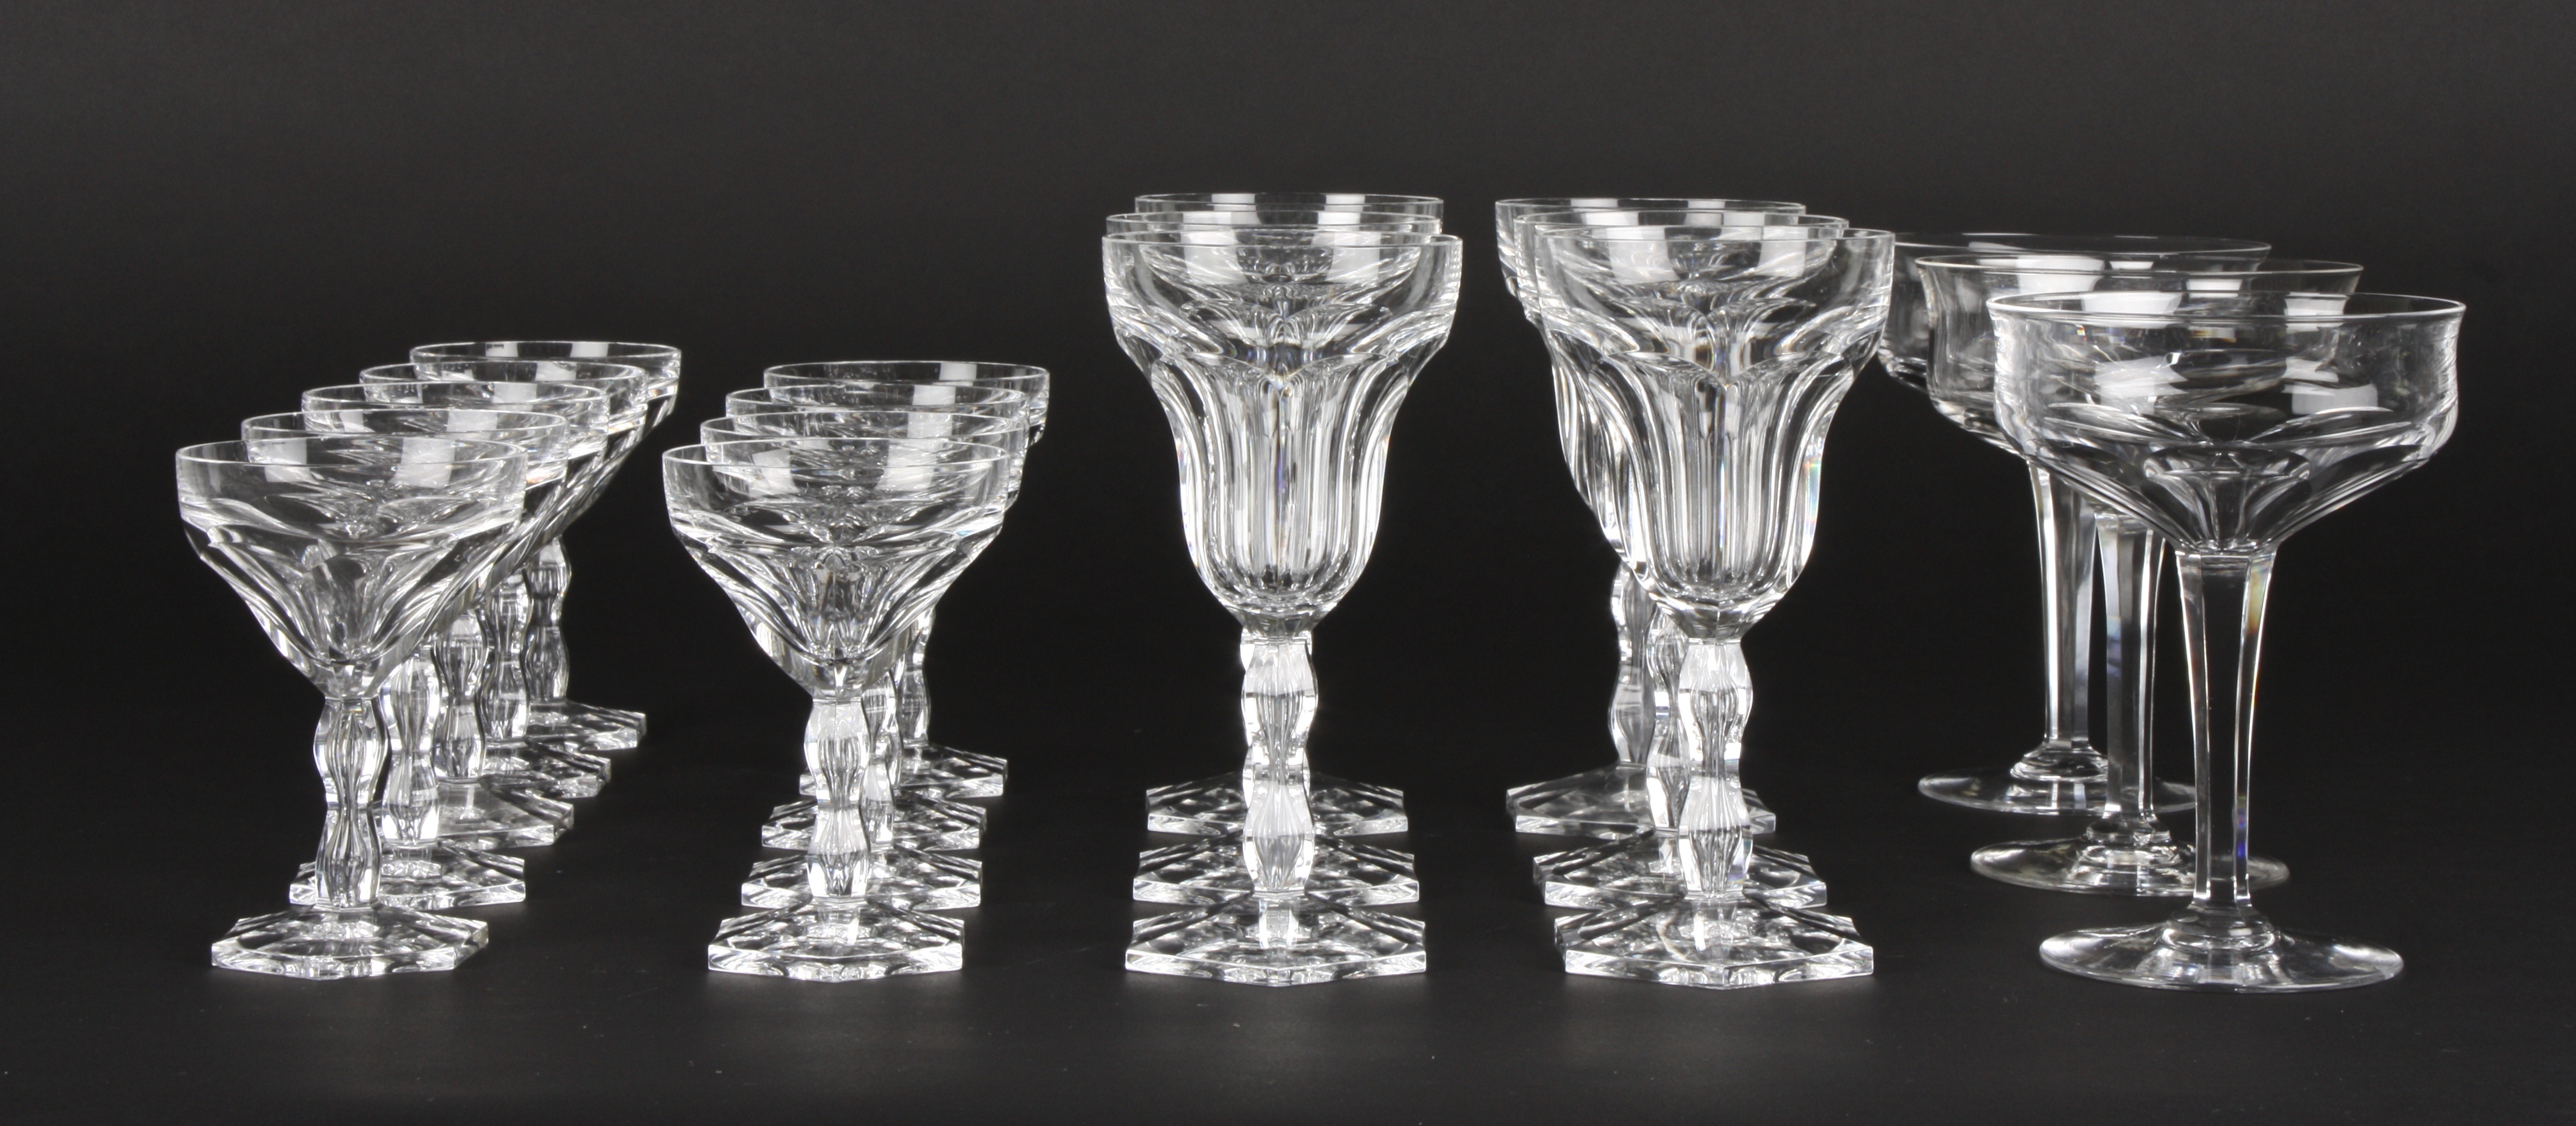 Two sets of cut glass drinking glasses
comprising six wine glasses and nine smaller sherry